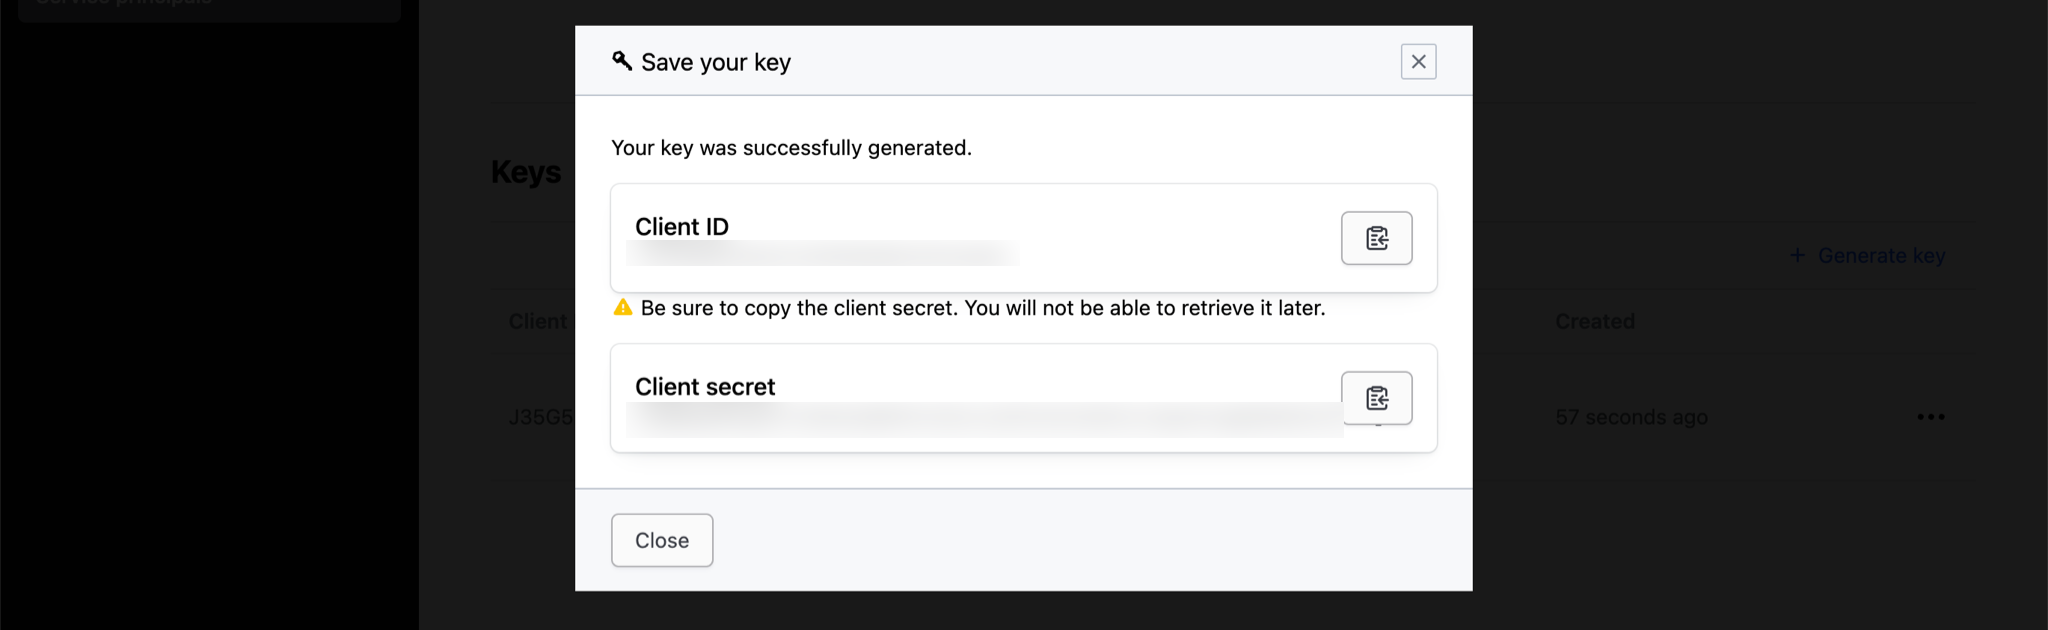 Create service principal key dialog with Client ID and Client secret